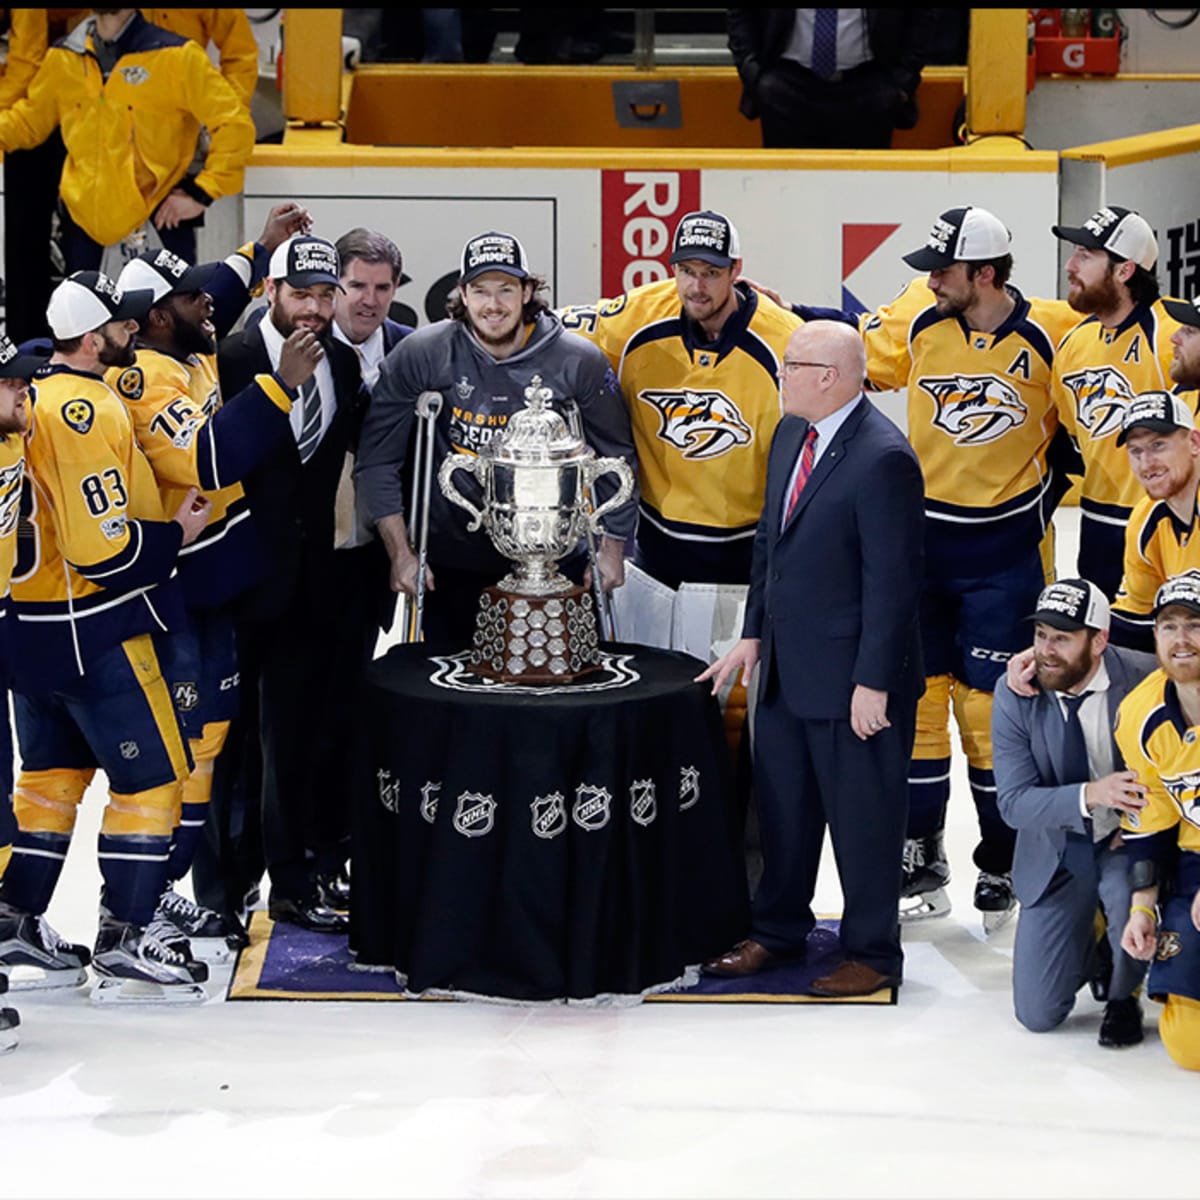  The Sports Vault NHL 14-inch Stanley Cup Champions